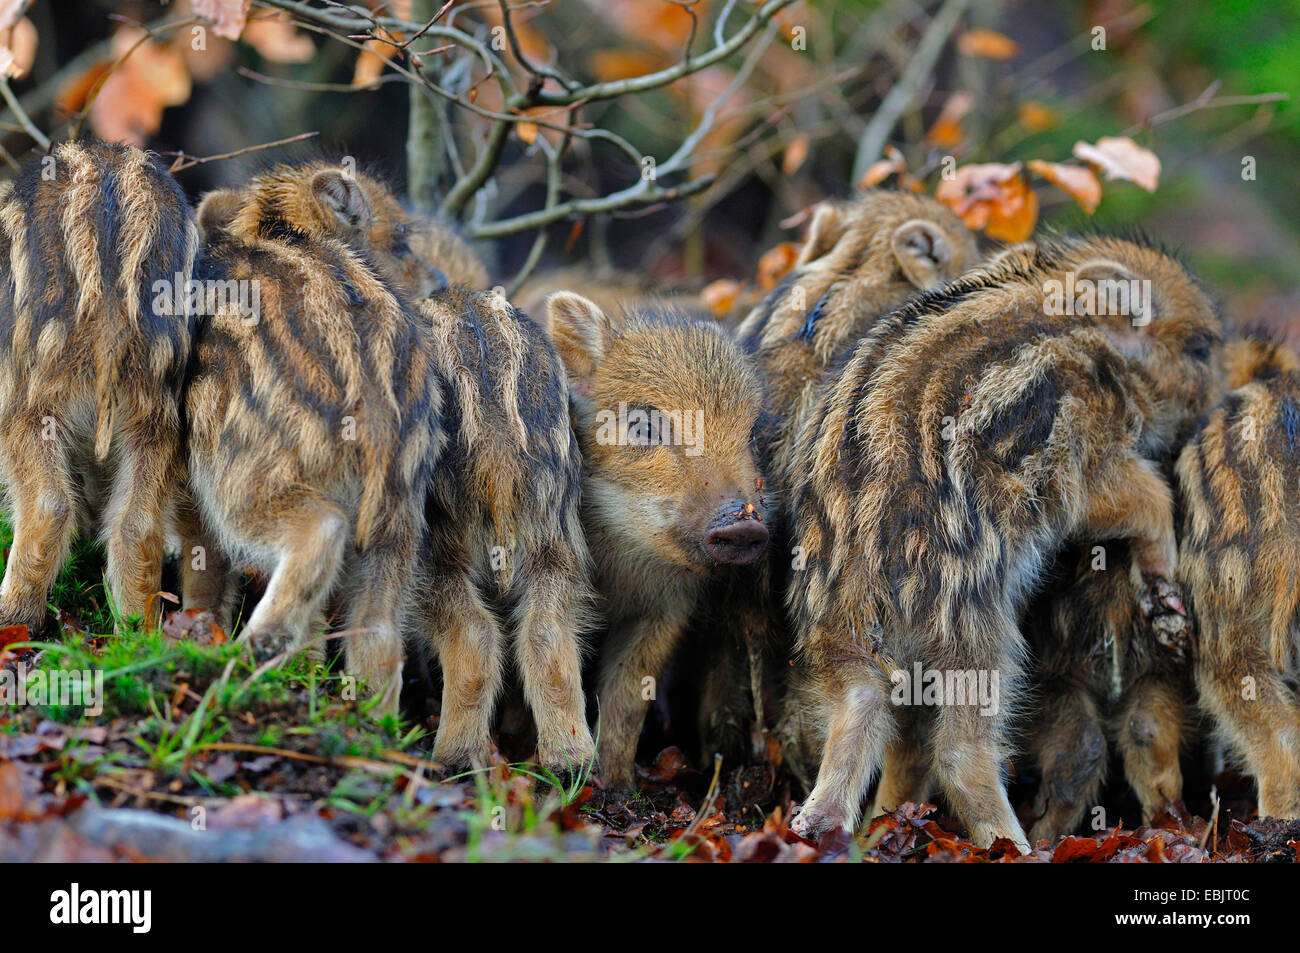 wild boar, pig, wild boar (Sus scrofa), shoats warming up at each other, Germany Stock Photo